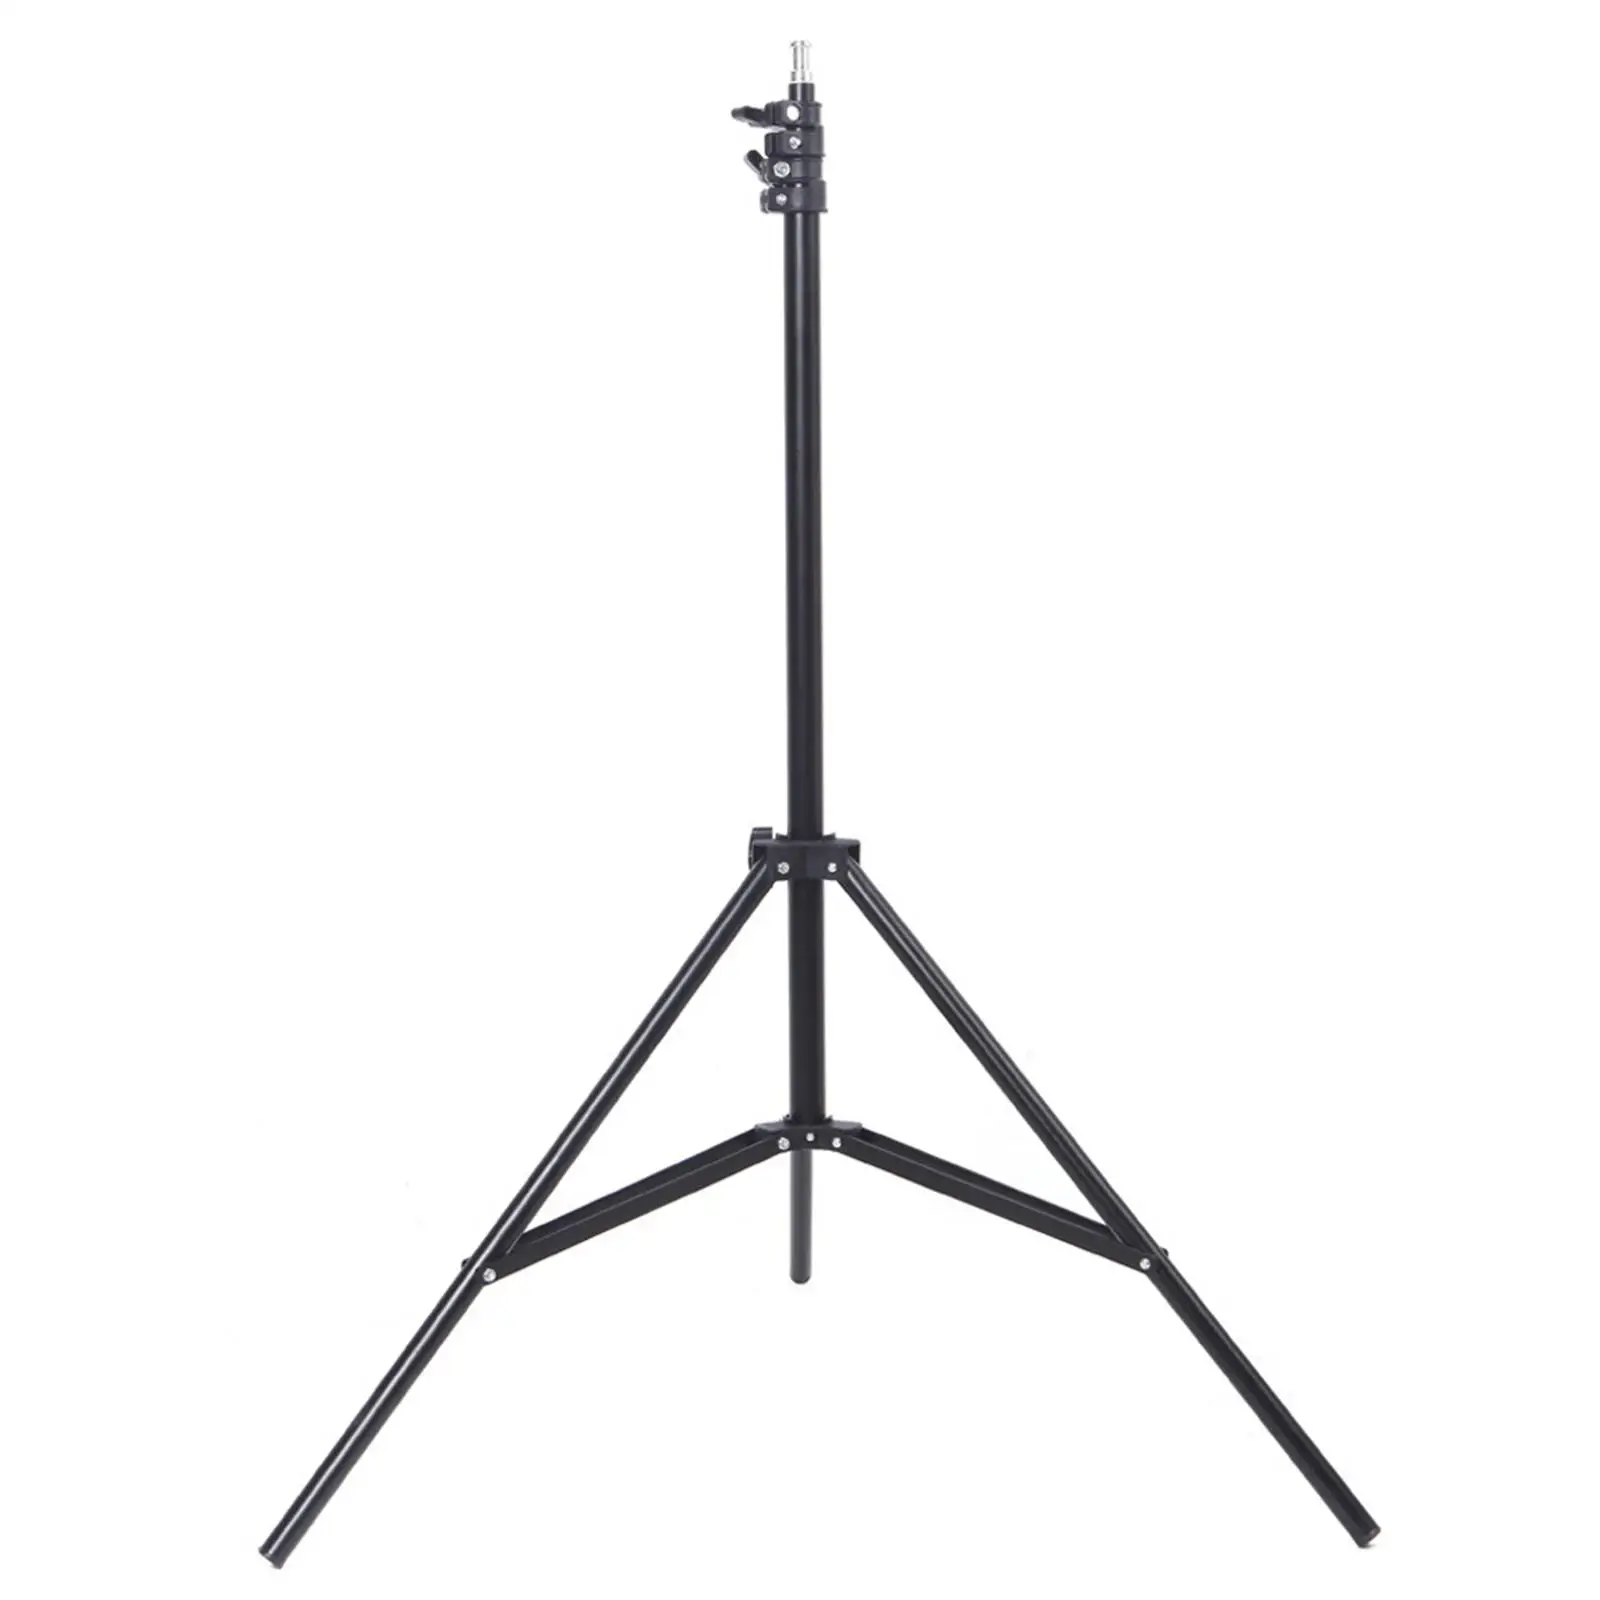 Photography Light Stand Tripod Aluminum Alloy Extendable Folding for Lights